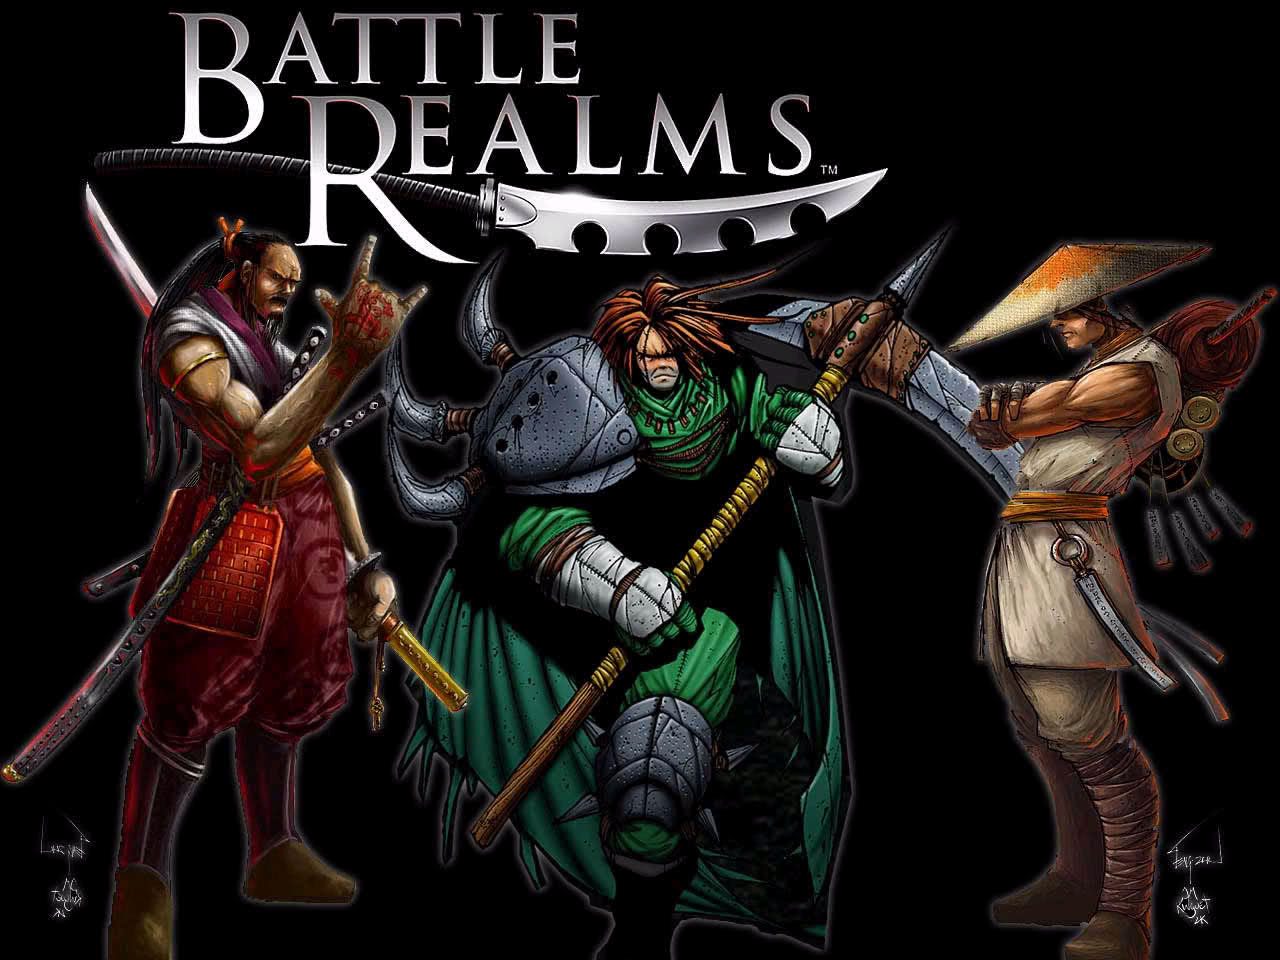 battle realm 2 rip download